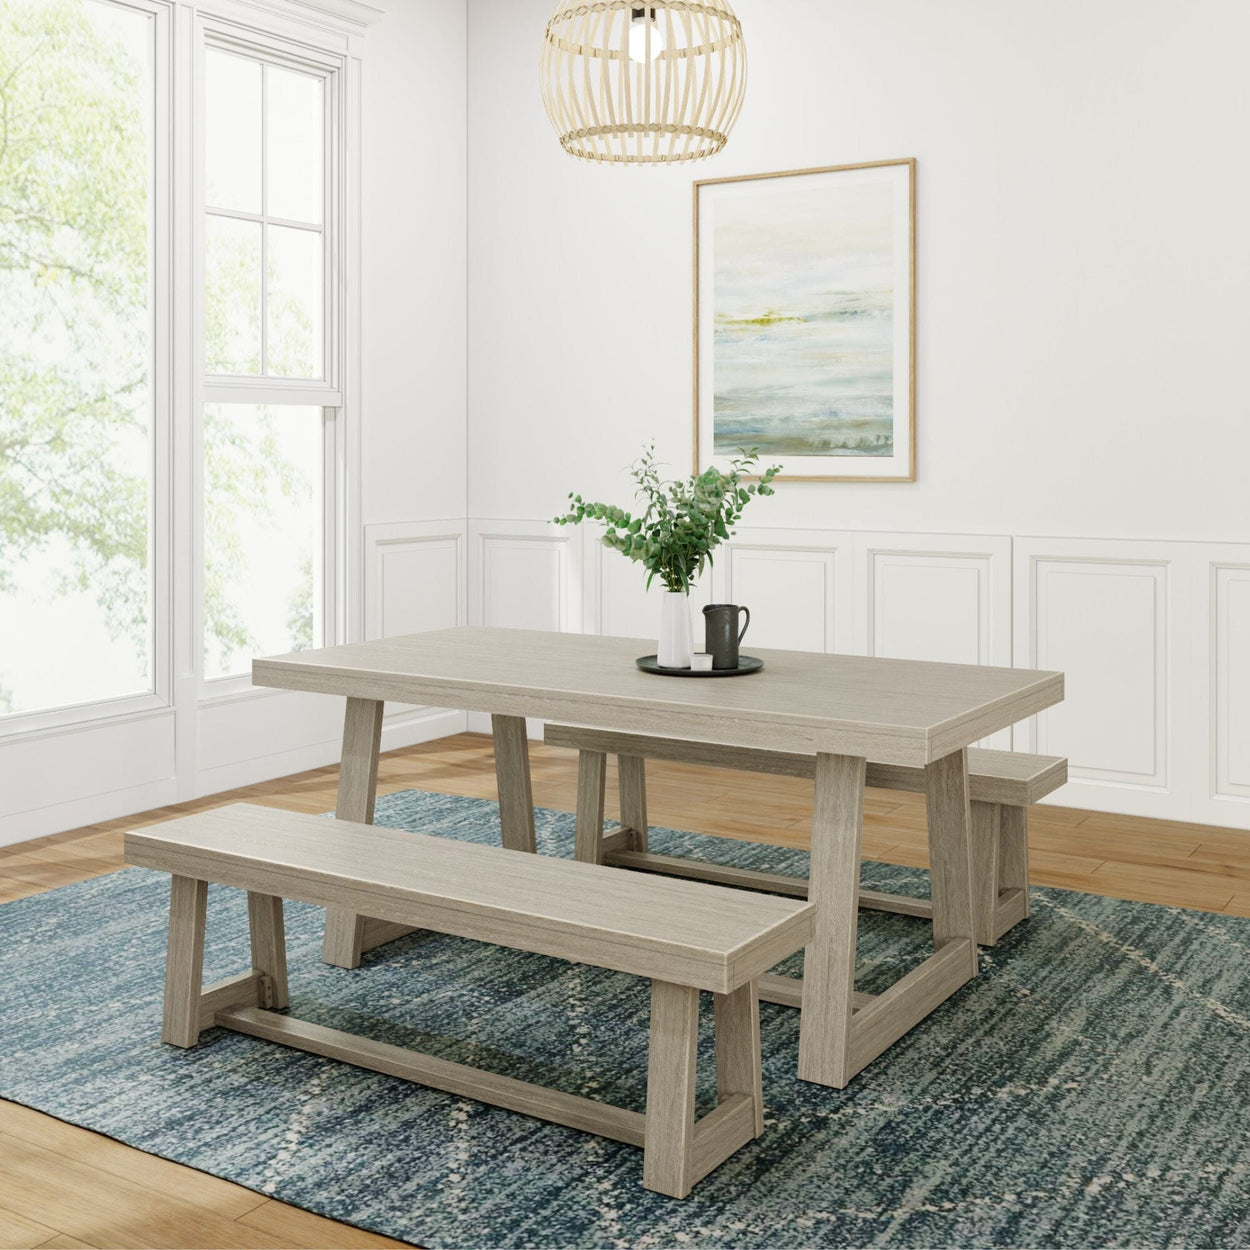 Classic Solid Wood Dining Table Set with 2 Benches Dining Plank+Beam Seashell Wirebrush 